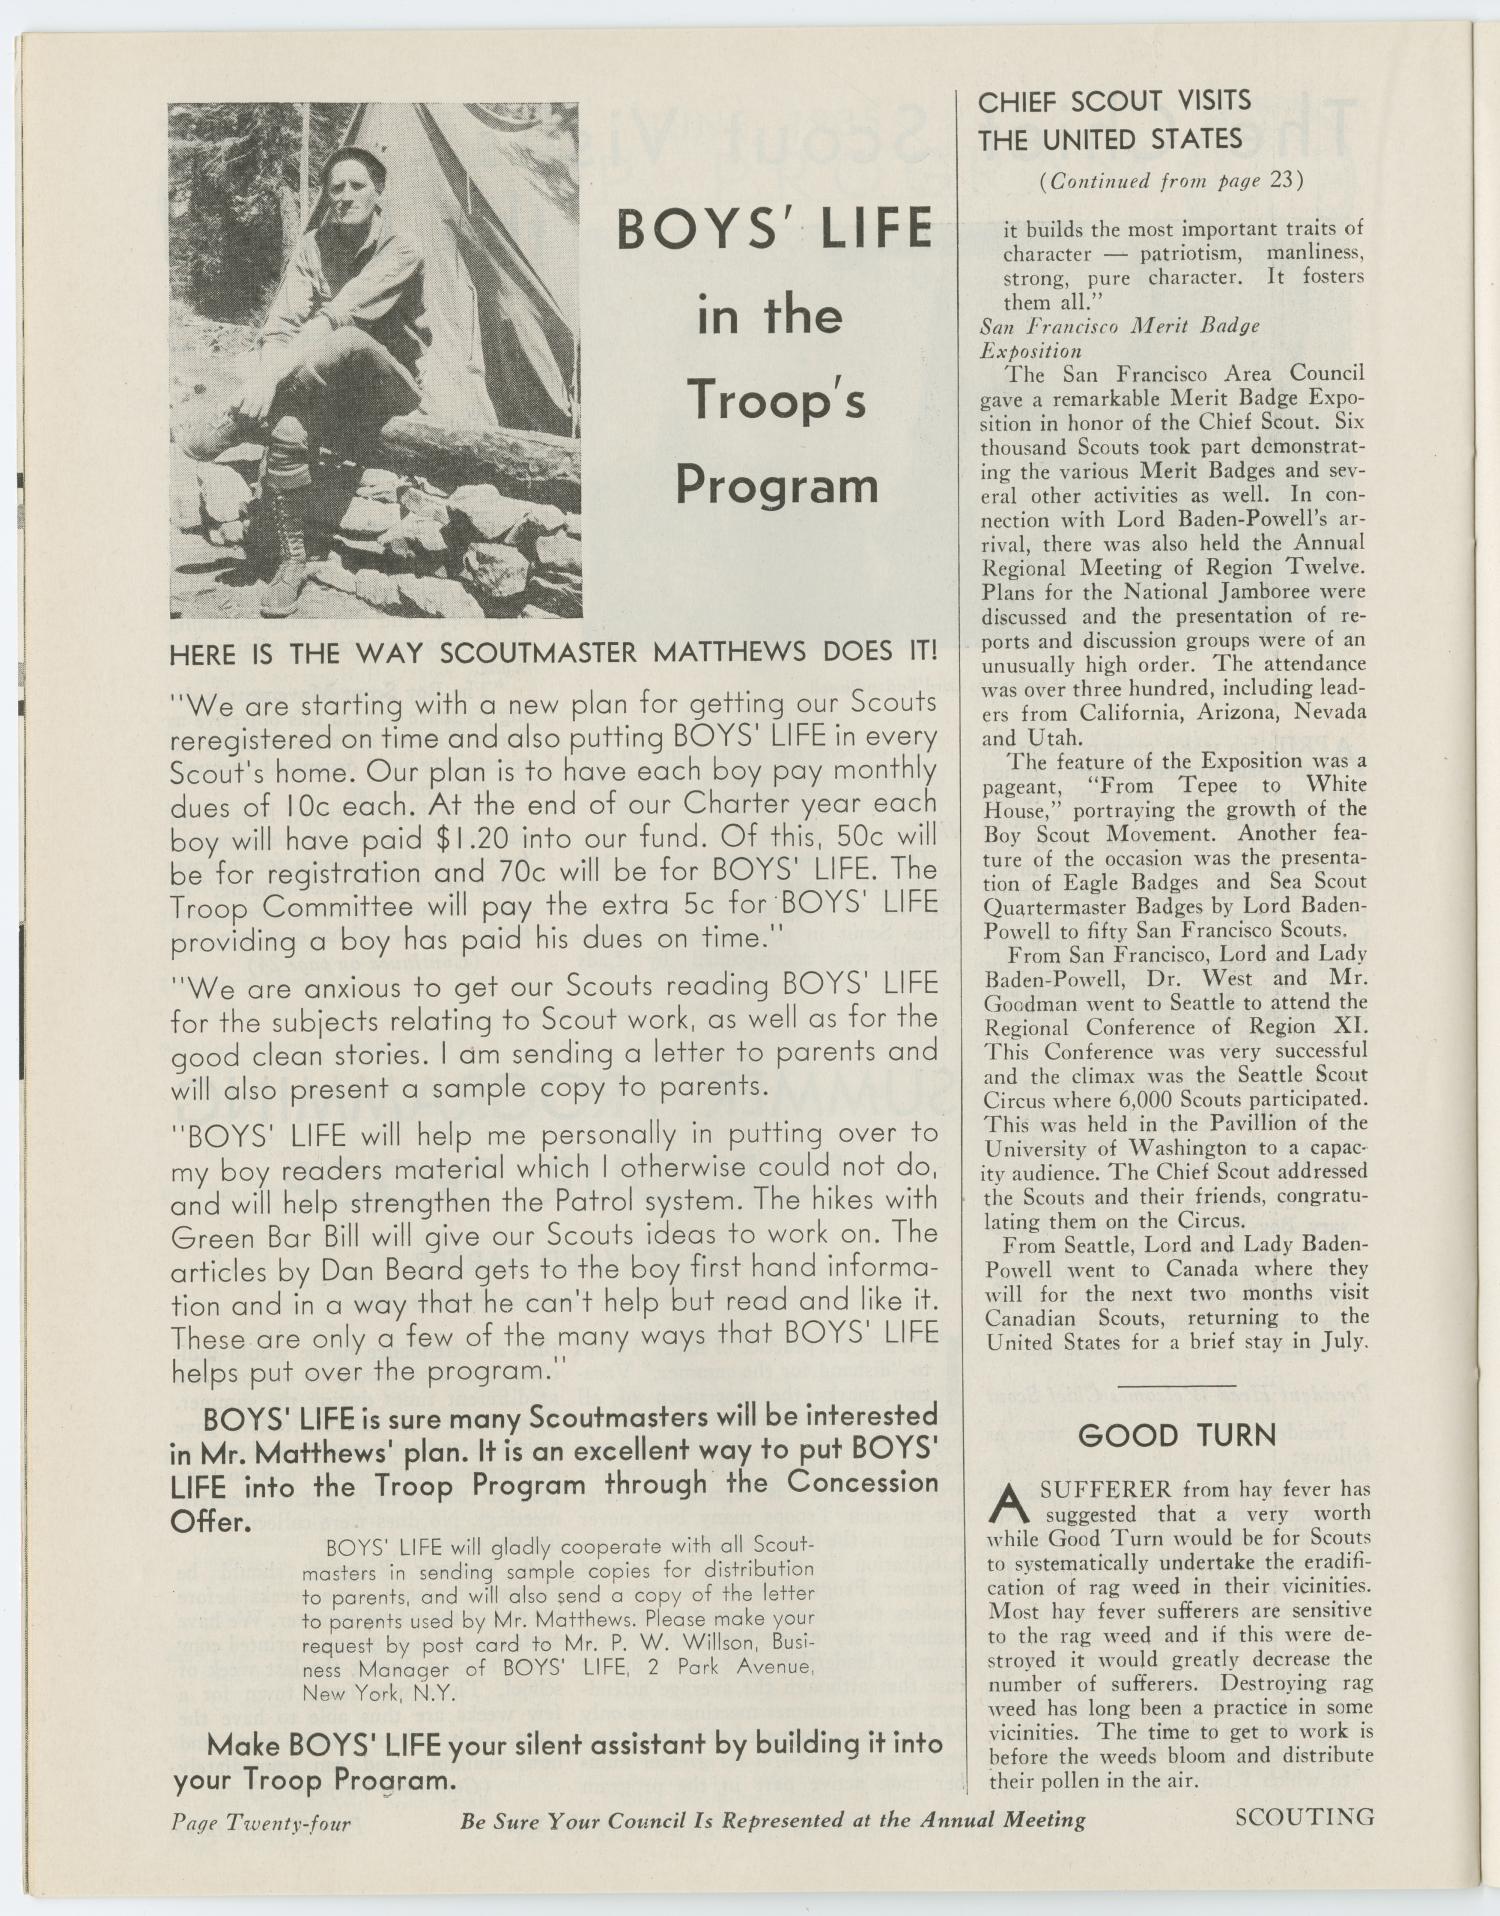 Scouting, Volume 23, Number 5, May 1935
                                                
                                                    24
                                                